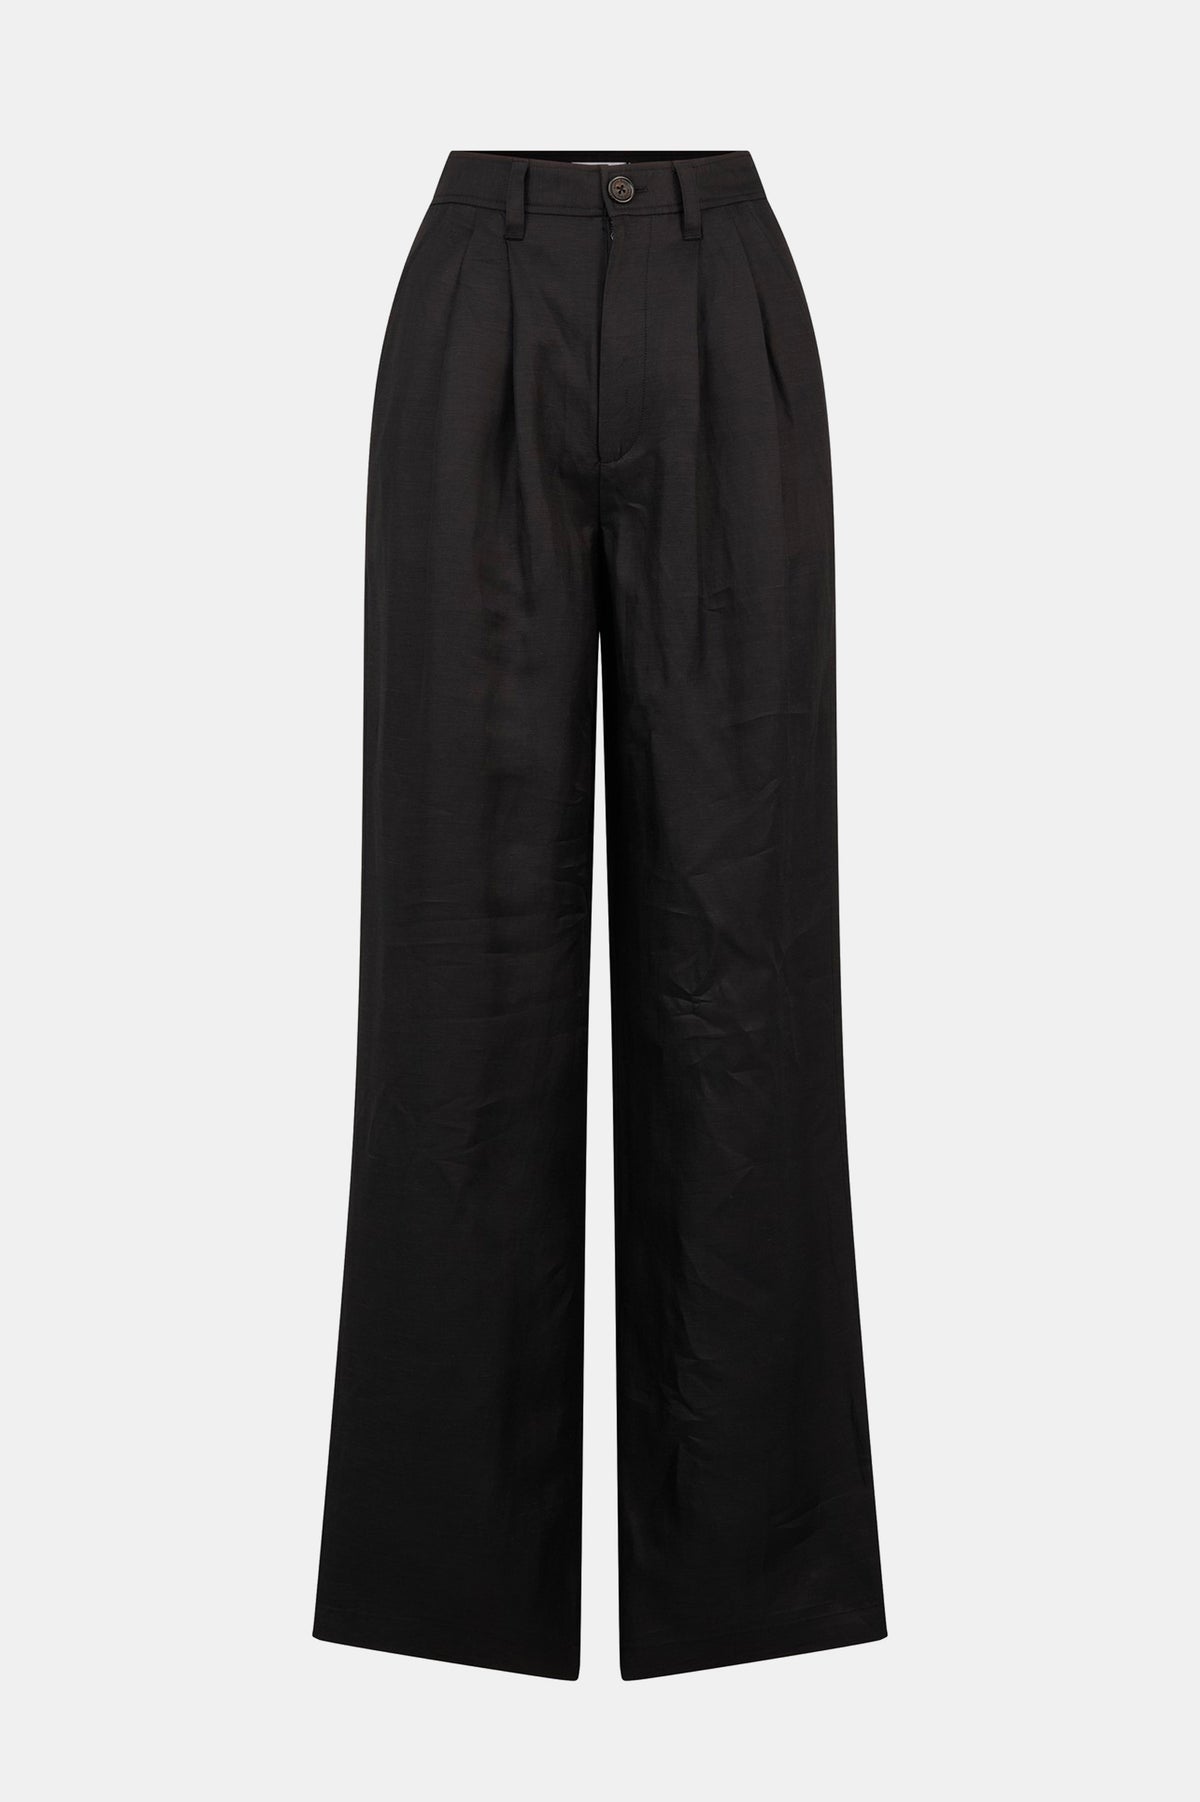 Carrie Pant in Black Twill